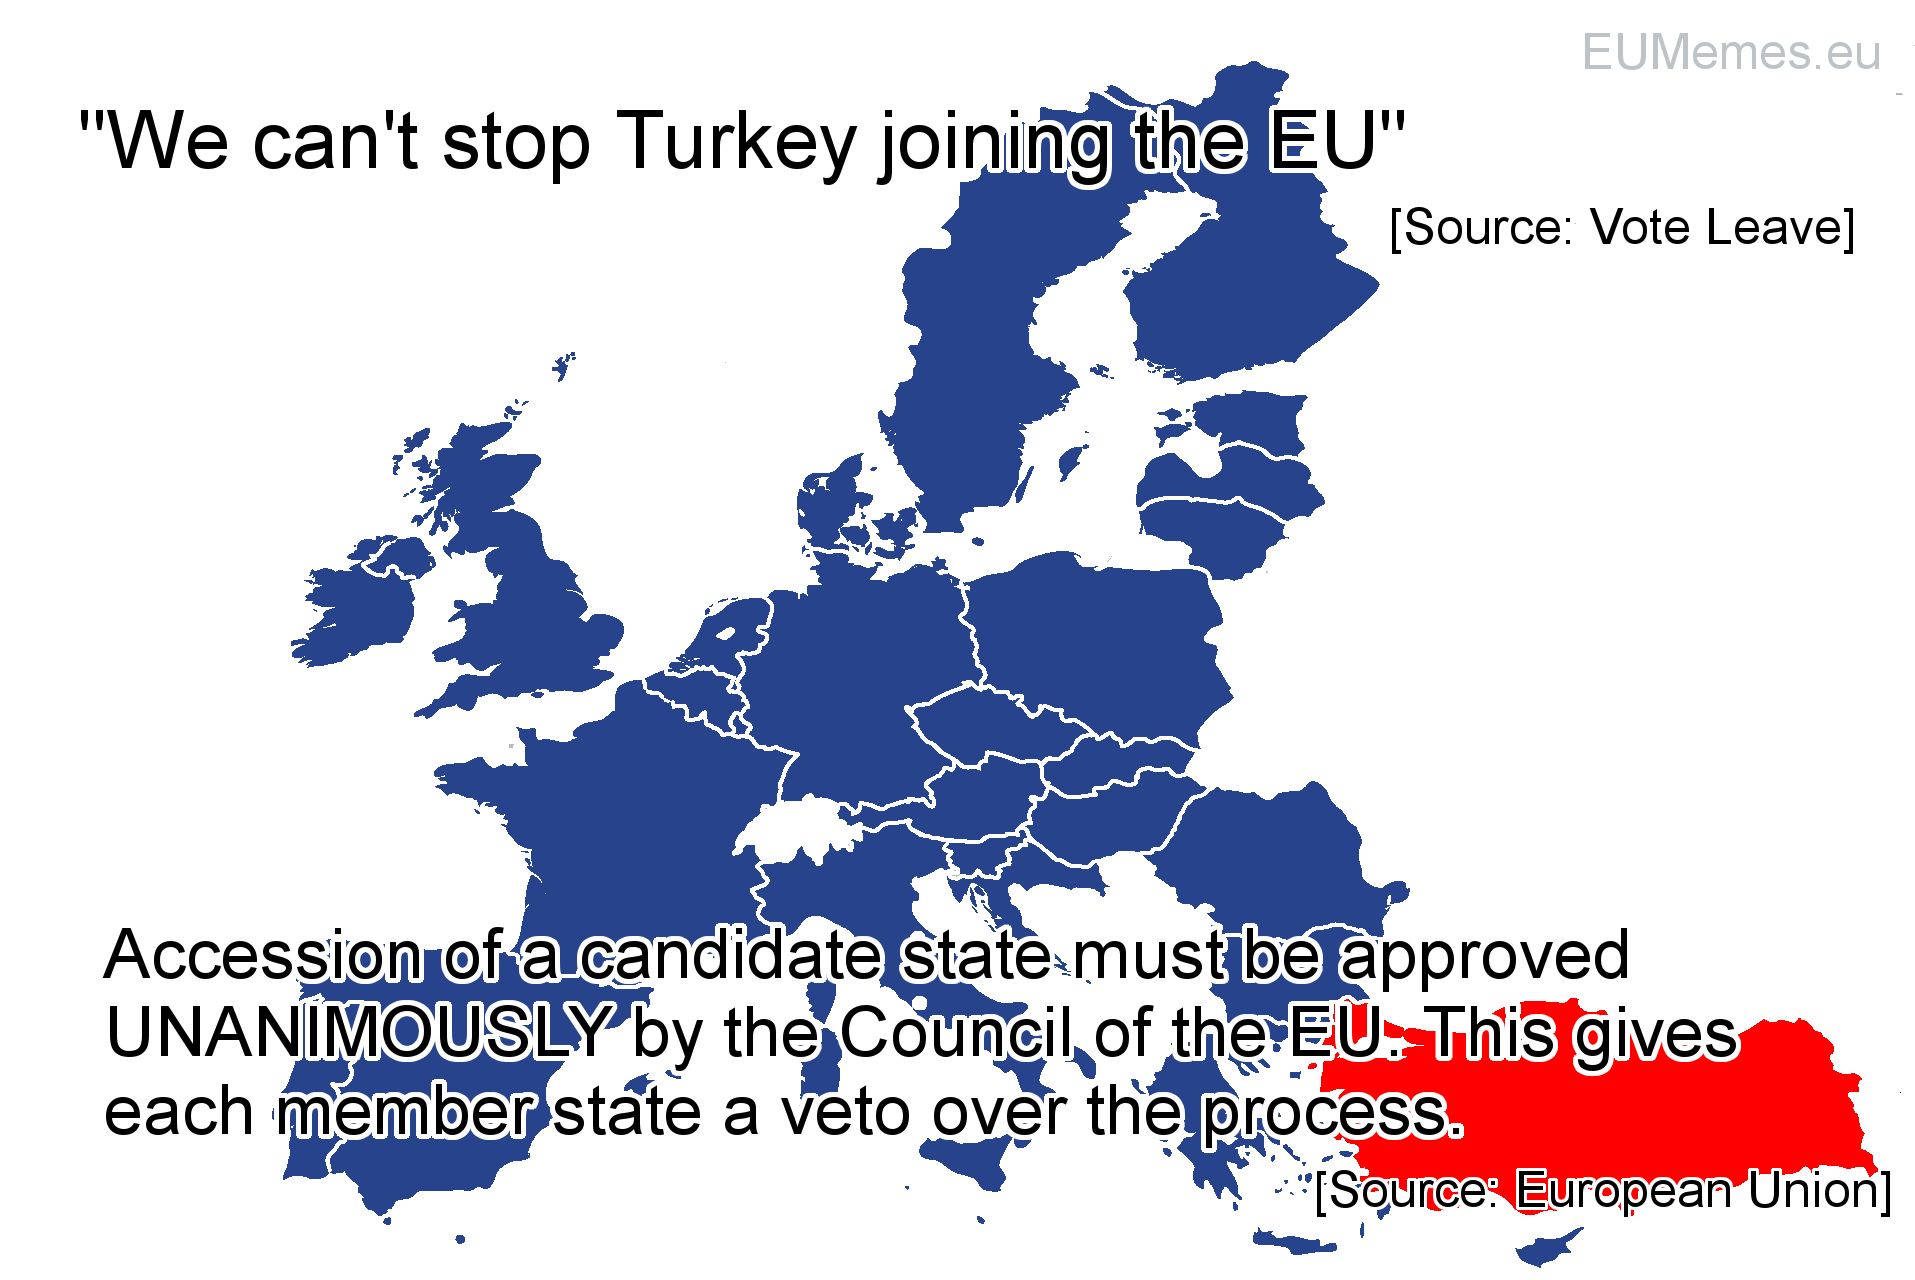 The UK does have a veto over Turkey joining the EU